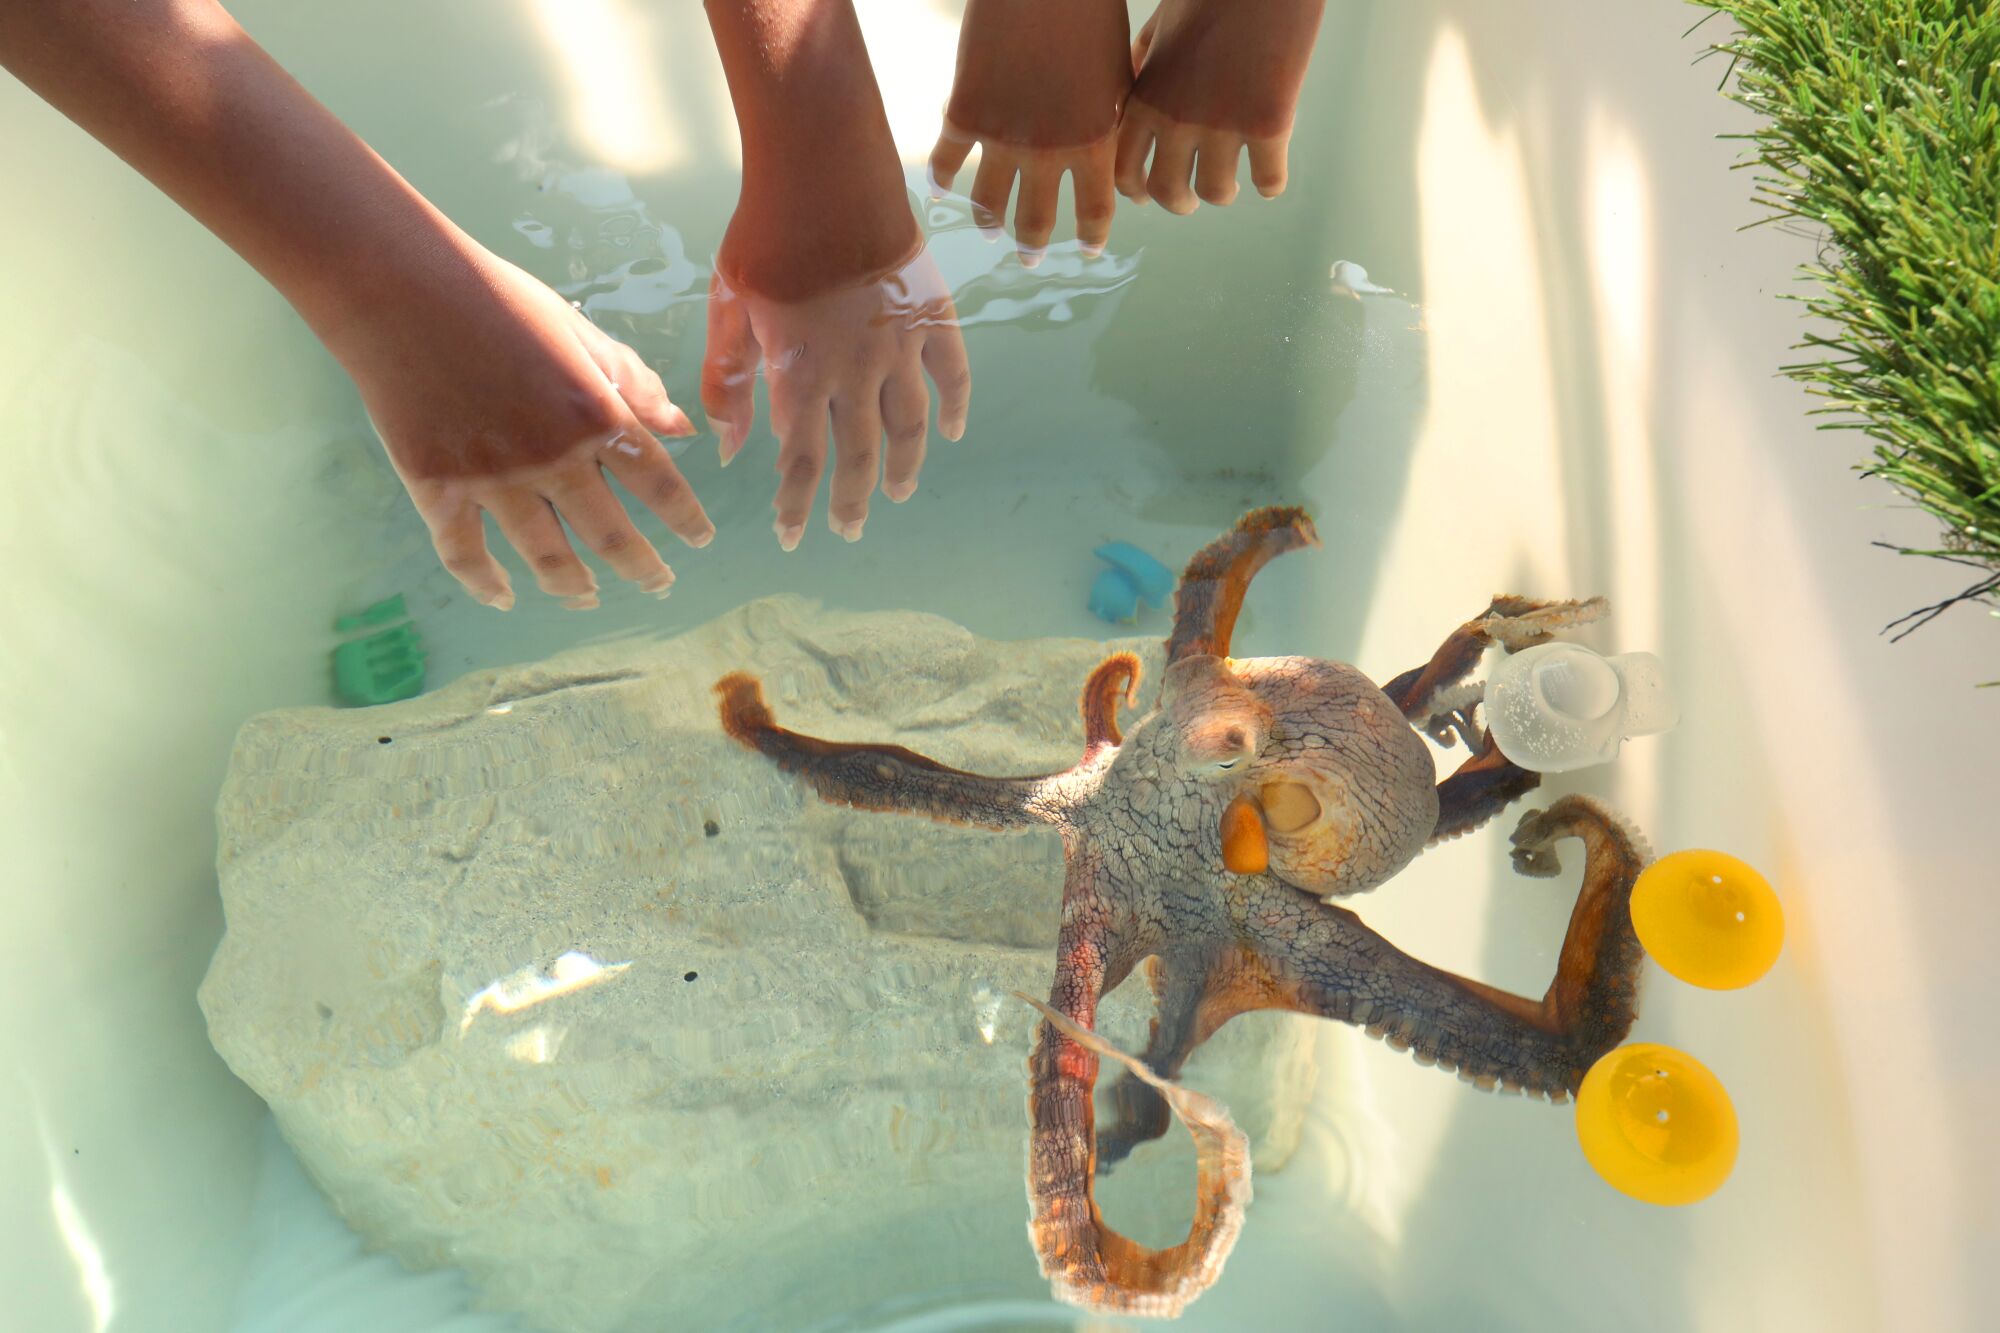 two sets of hands reach into water where an octopus is below them.